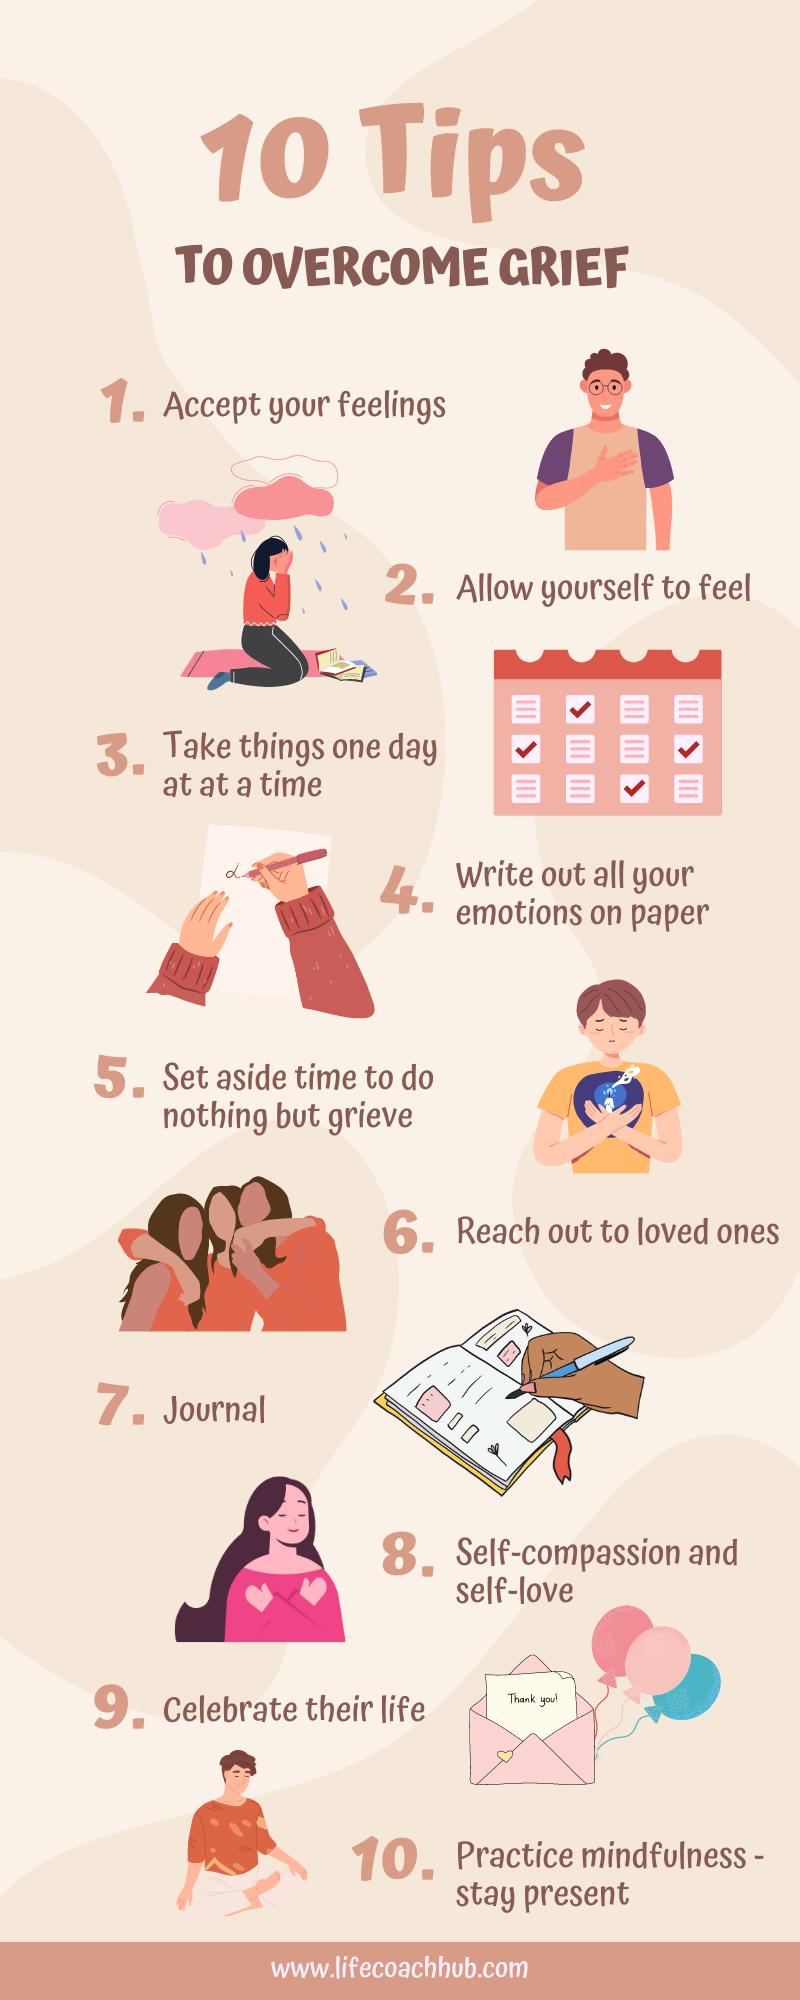 10 Tips to Overcome Grief